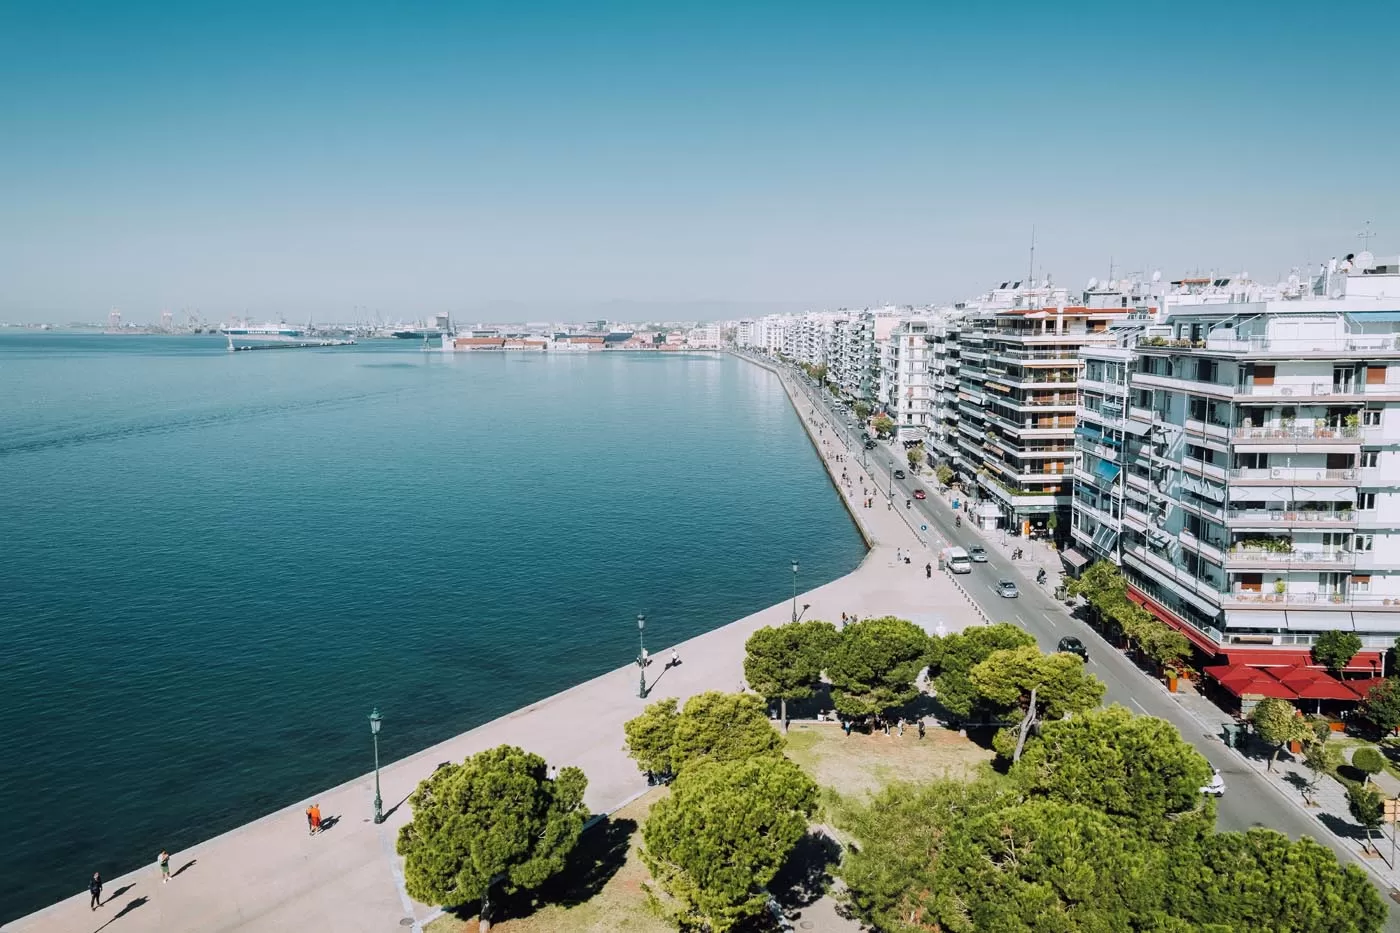 Things to do in Thessaloniki - White Tower Museum - View of City and Coastline